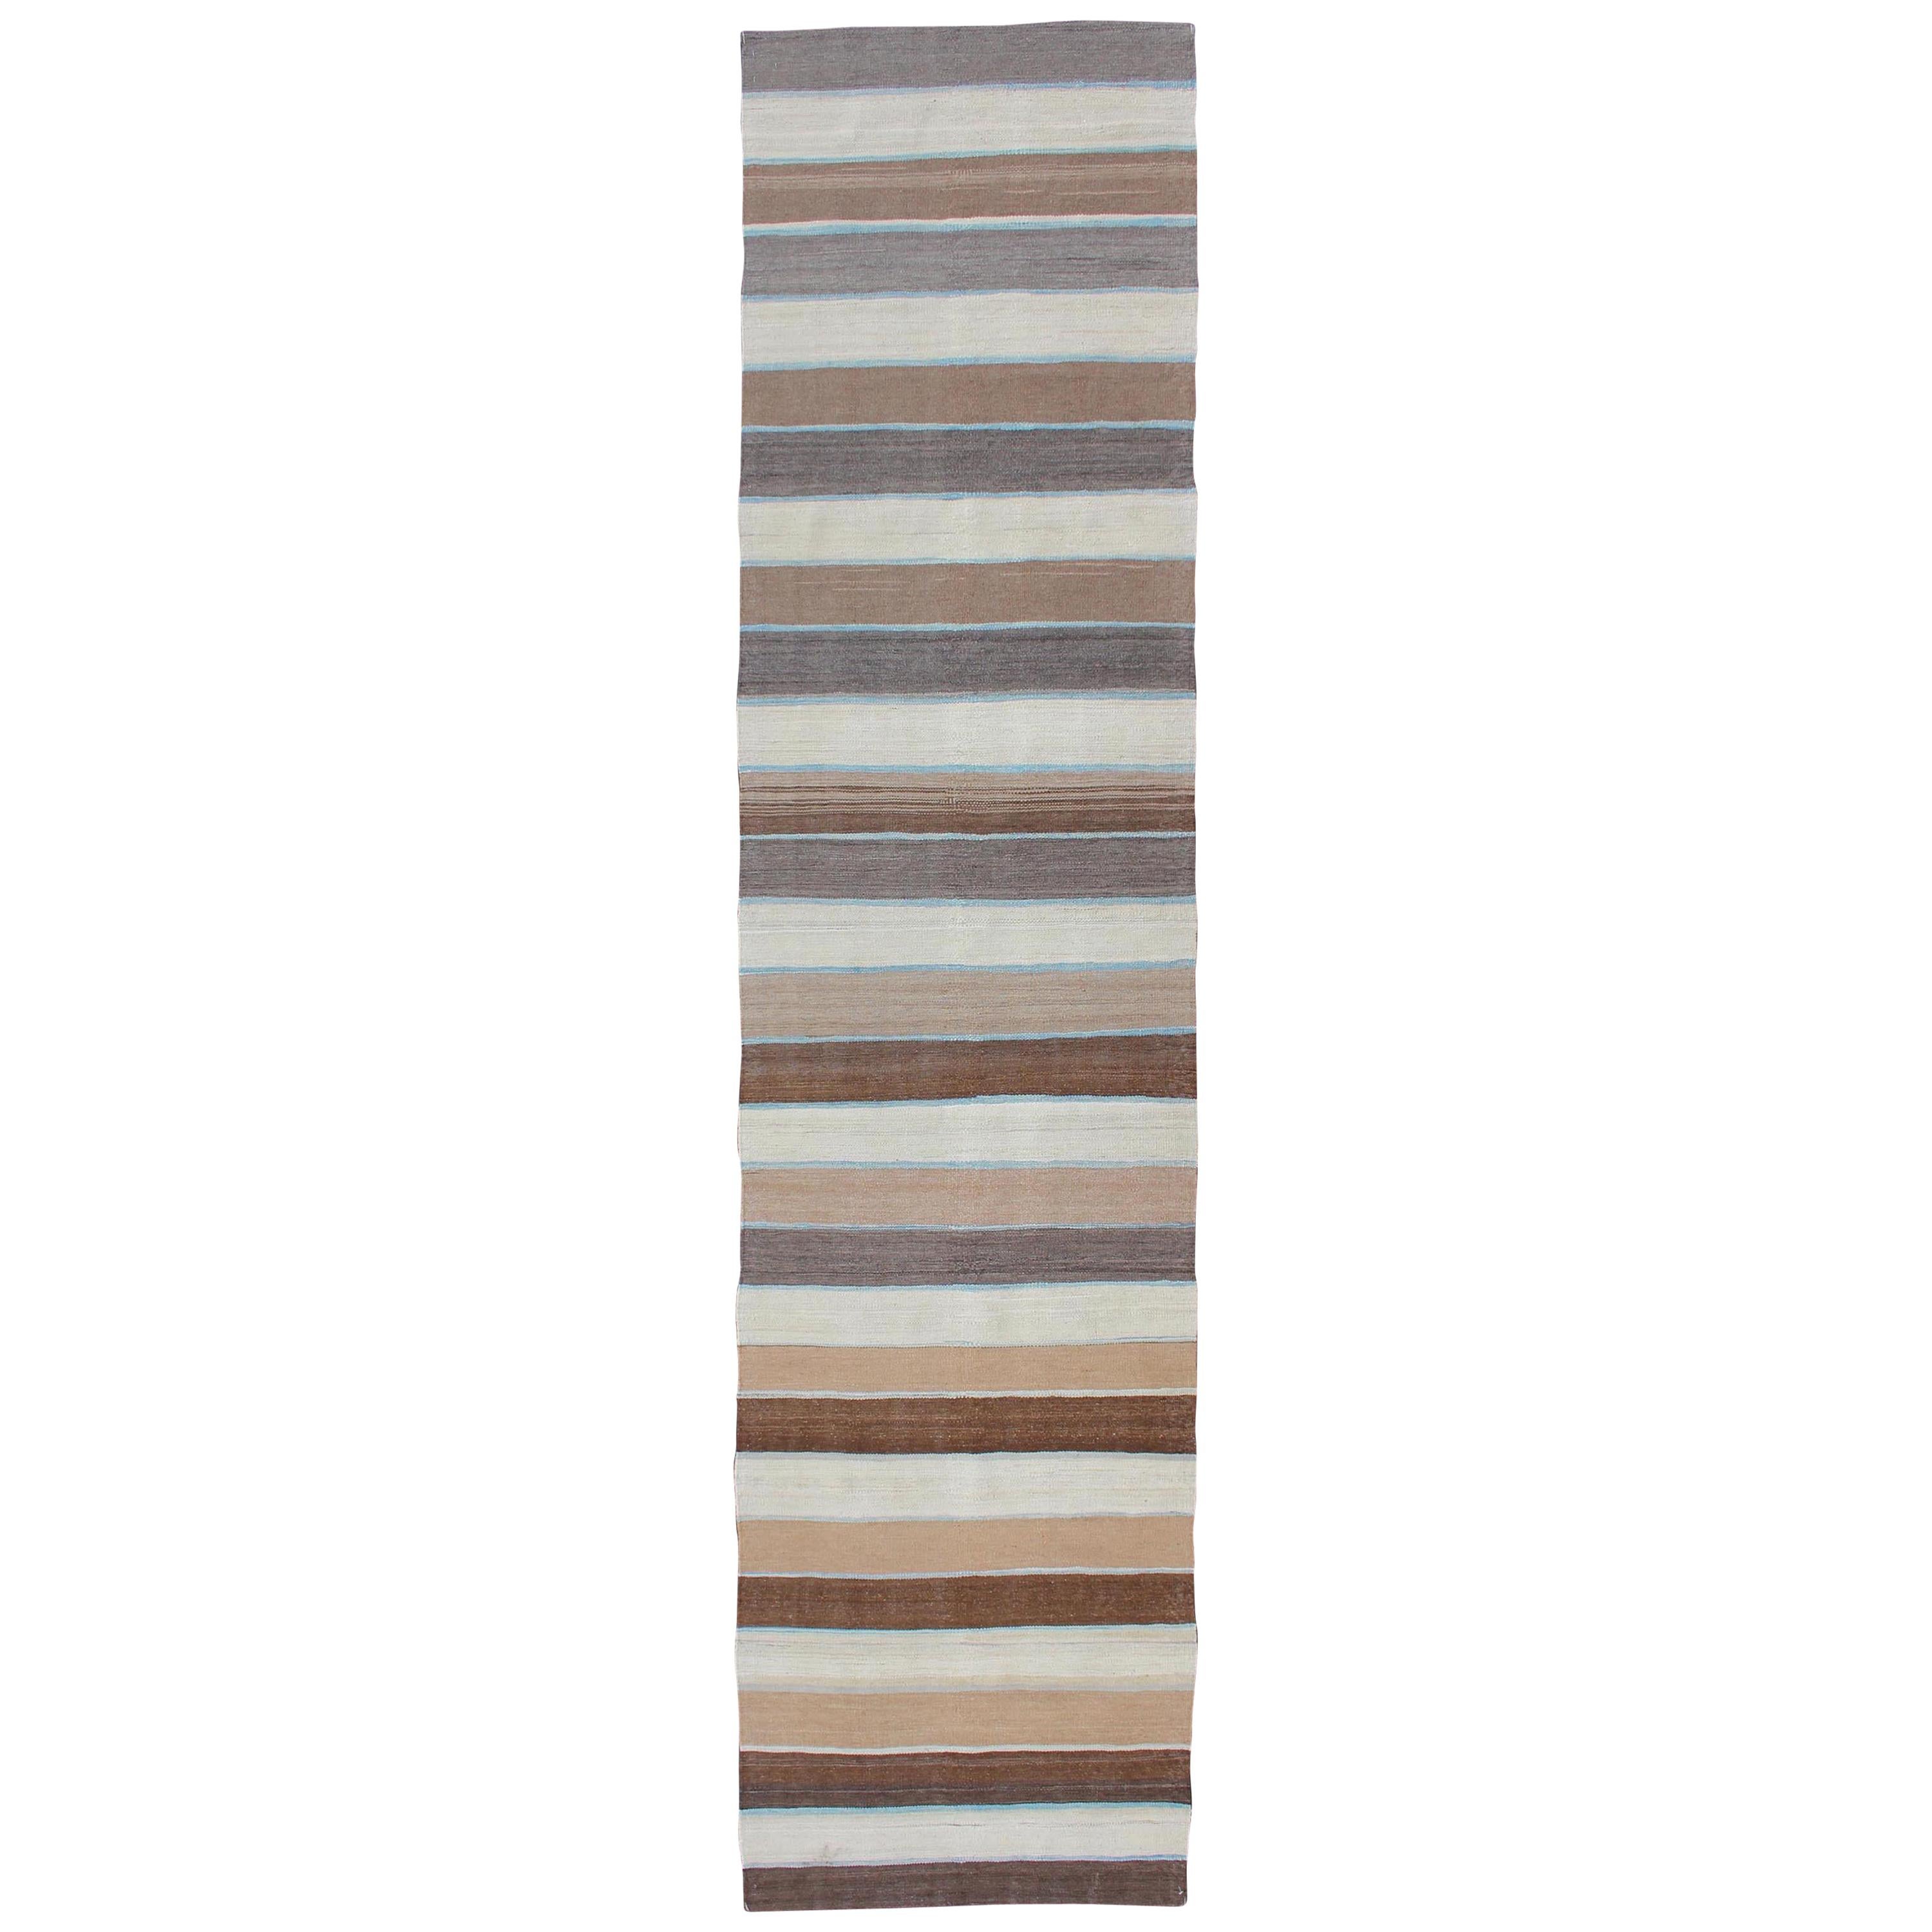 Modern Kilim Rug with Stripes in Shades of Blue, Taupe, Gray and Cream Runner For Sale